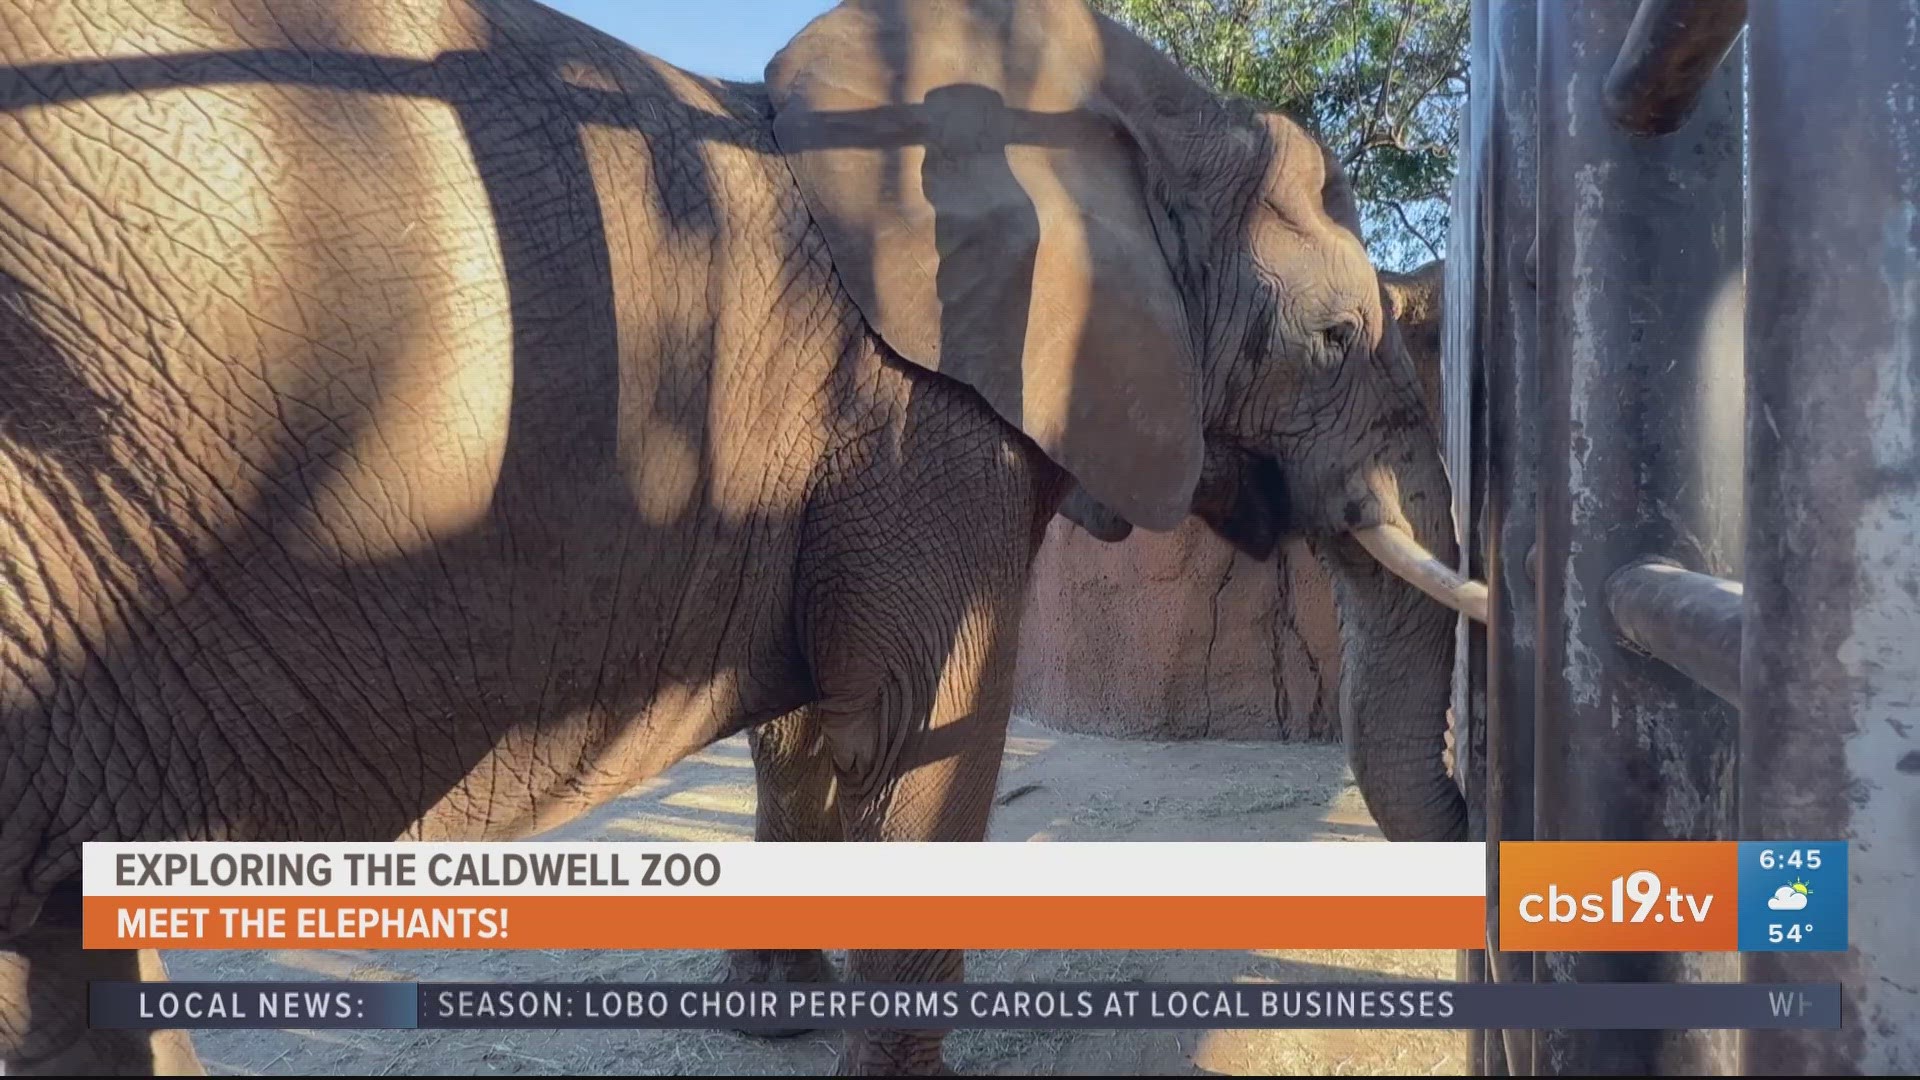 For more behind-the-scenes zoo content, watch CBS19 on Fridays during Morning Y'all for the weekly segment, Exploring the Caldwell Zoo.